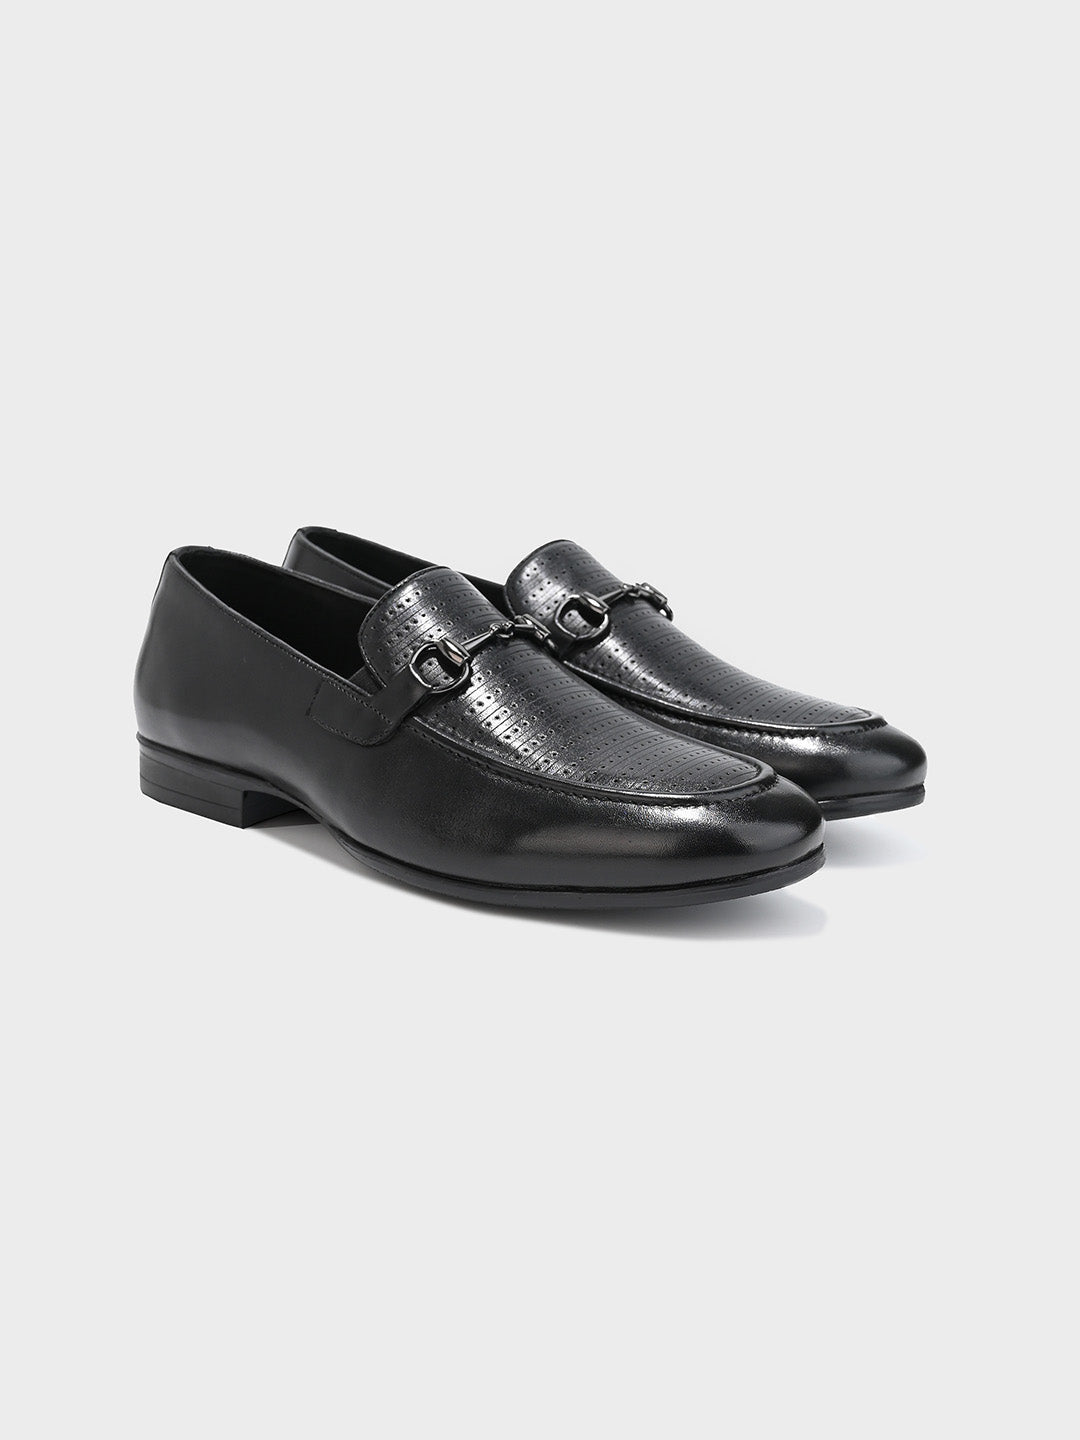 Black Leather Men's Loafer Slip-On Shoes – One8 Select